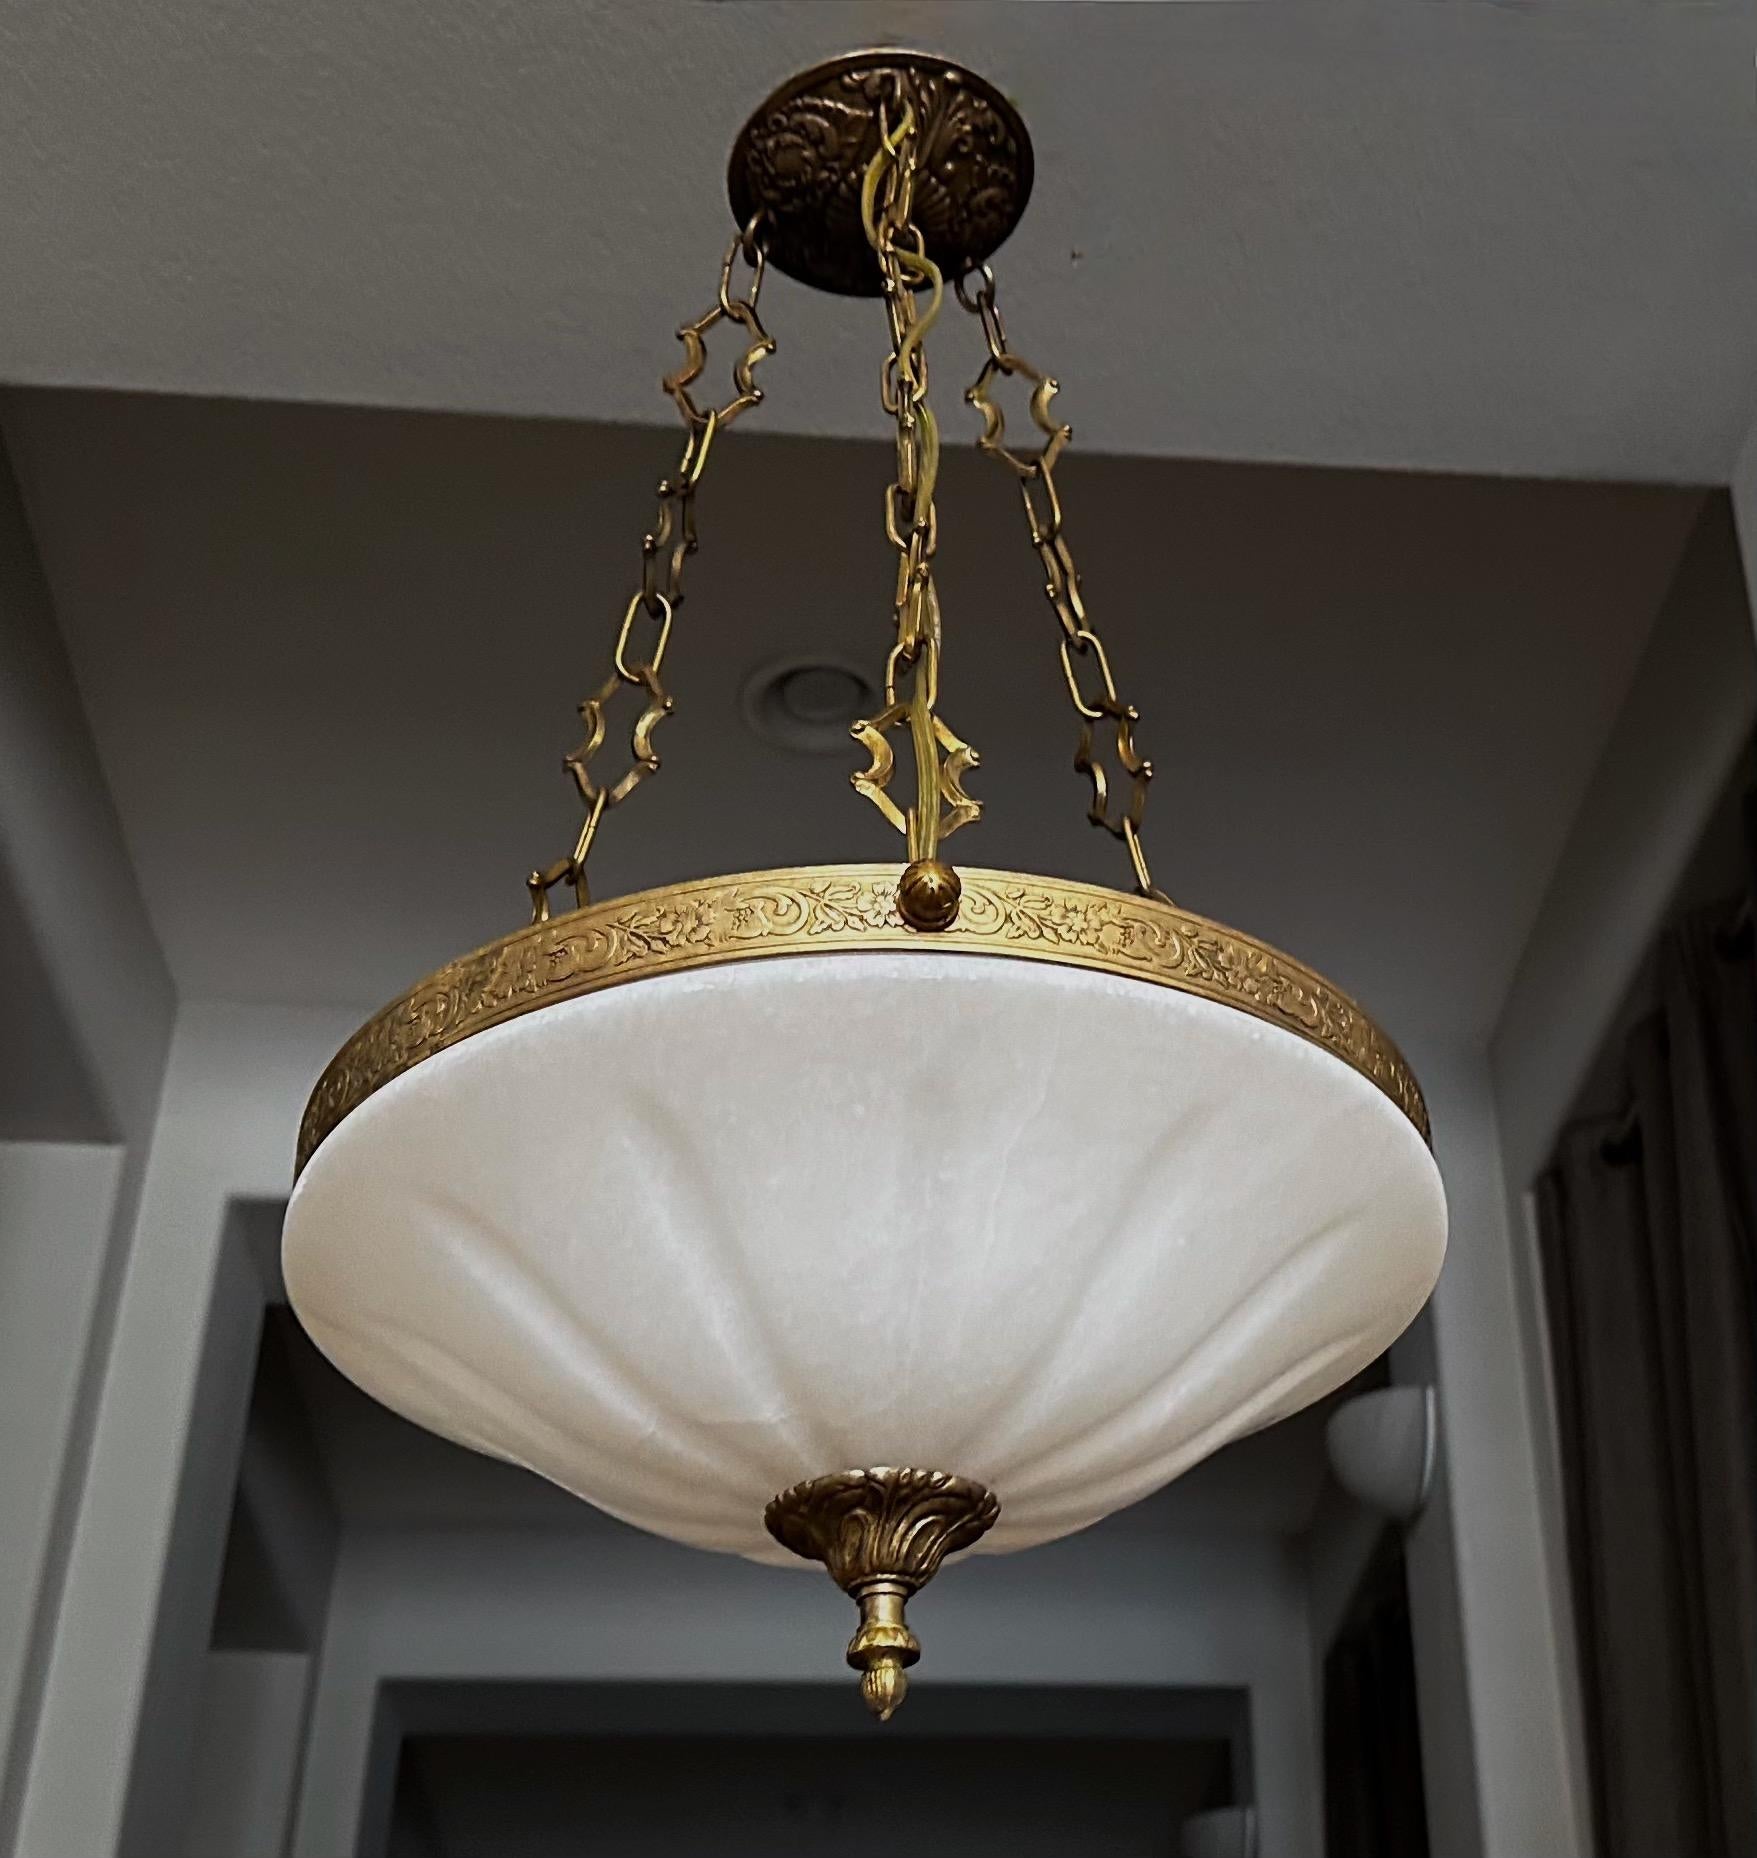 Alabaster pendant light or chandelier with aged patinated brass fittings in the Directoire style. Expertly carved with incised sunburst pattern design. Wired for US, fixture uses three candelabra size bulbs. 

Measures: Alabaster is 16